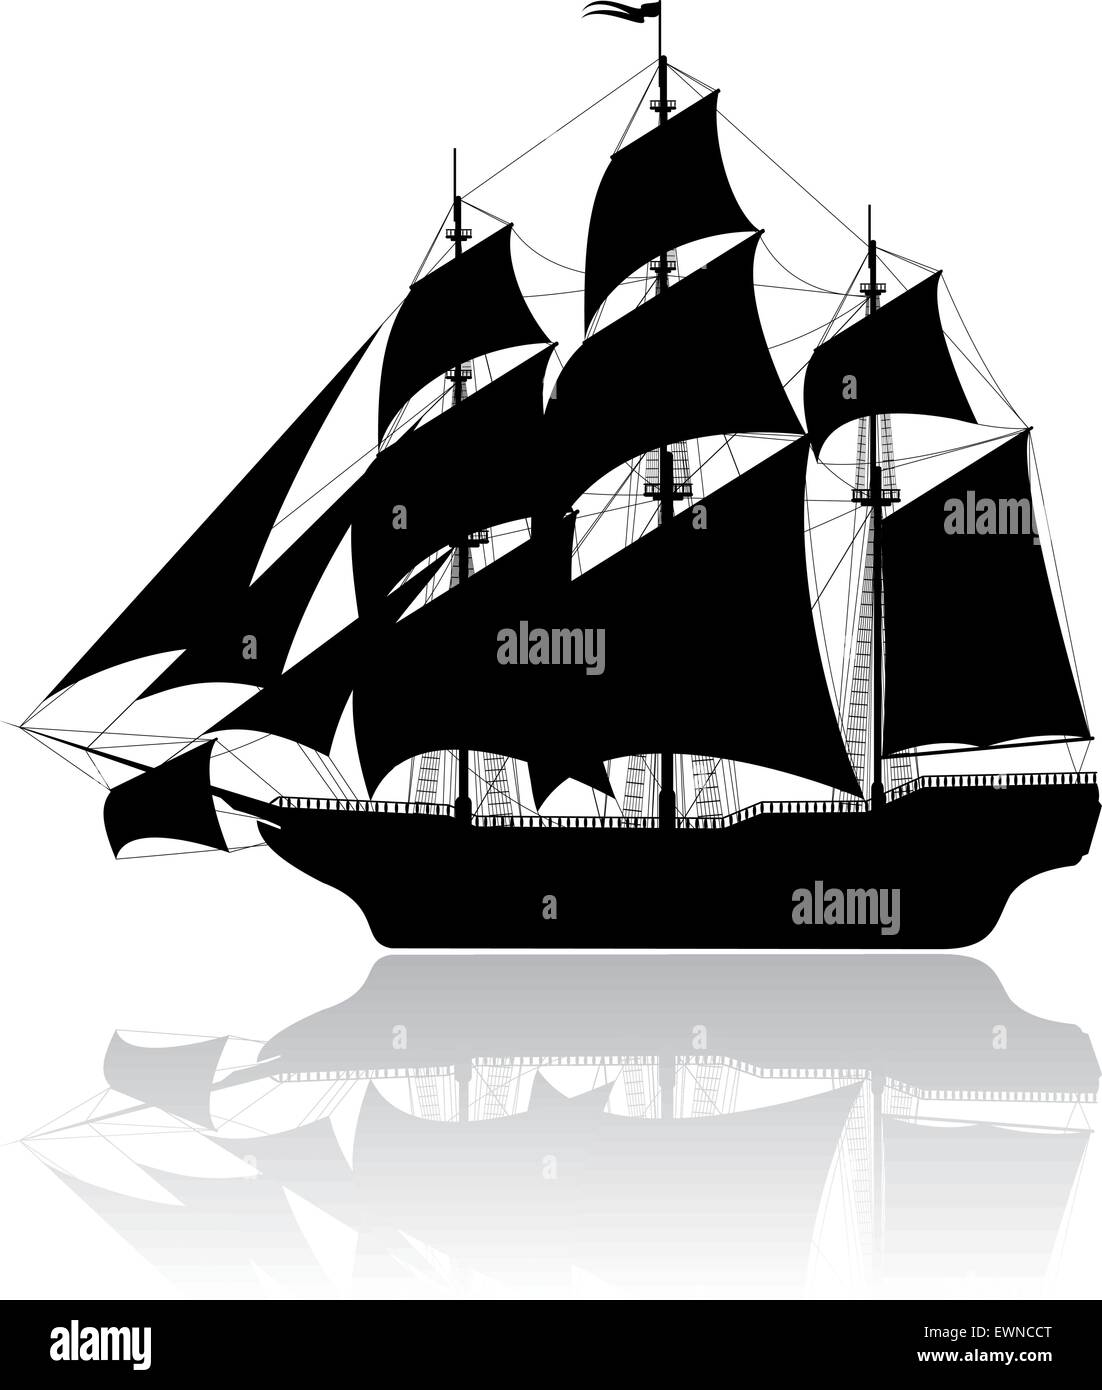 Black old sailing ship isolated on white background Stock Vector